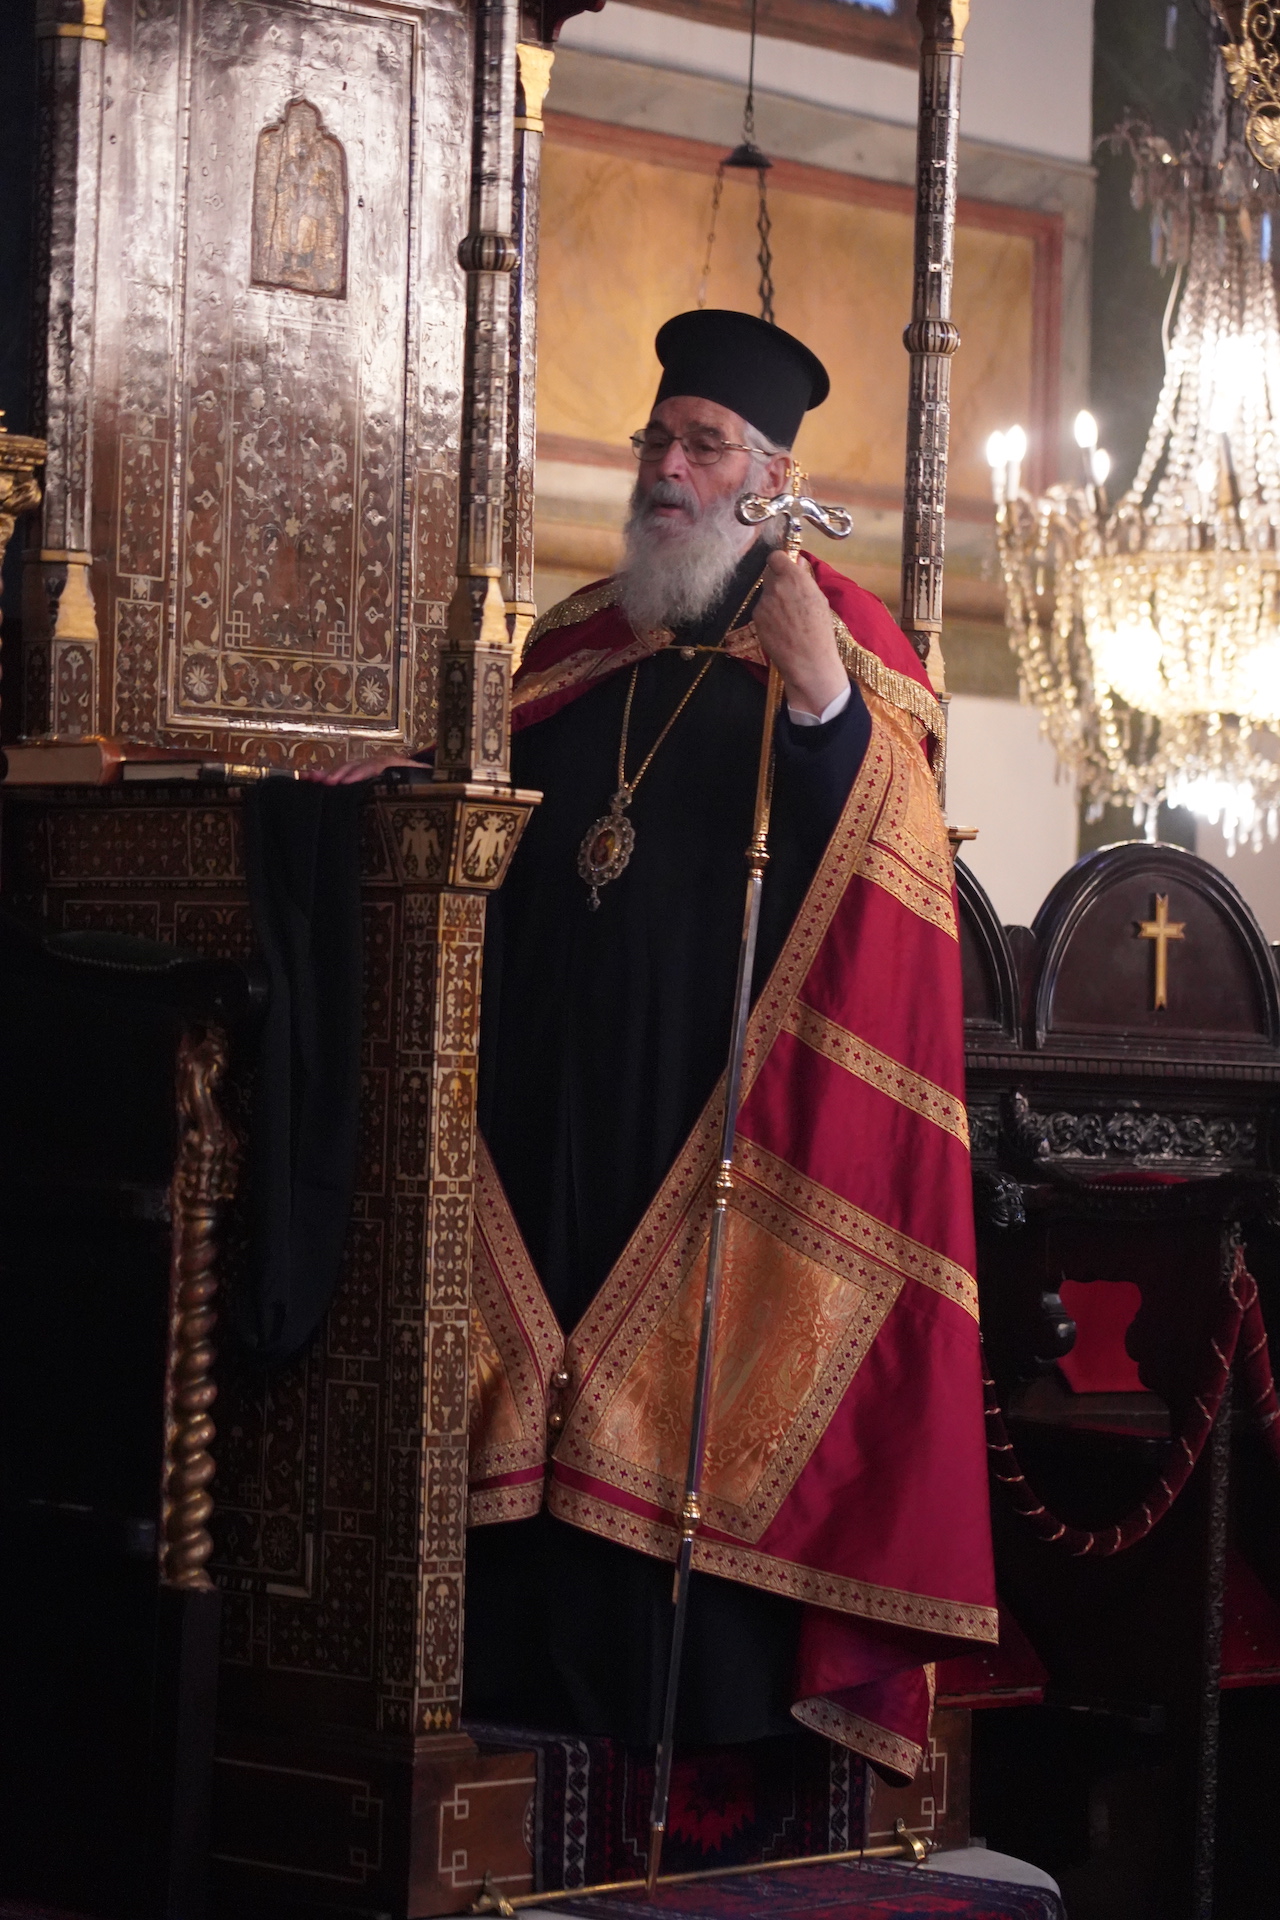 Metropolitan of Leros, Kalymnos and Astypalea officiates at the Patriarchal Church of Saint George